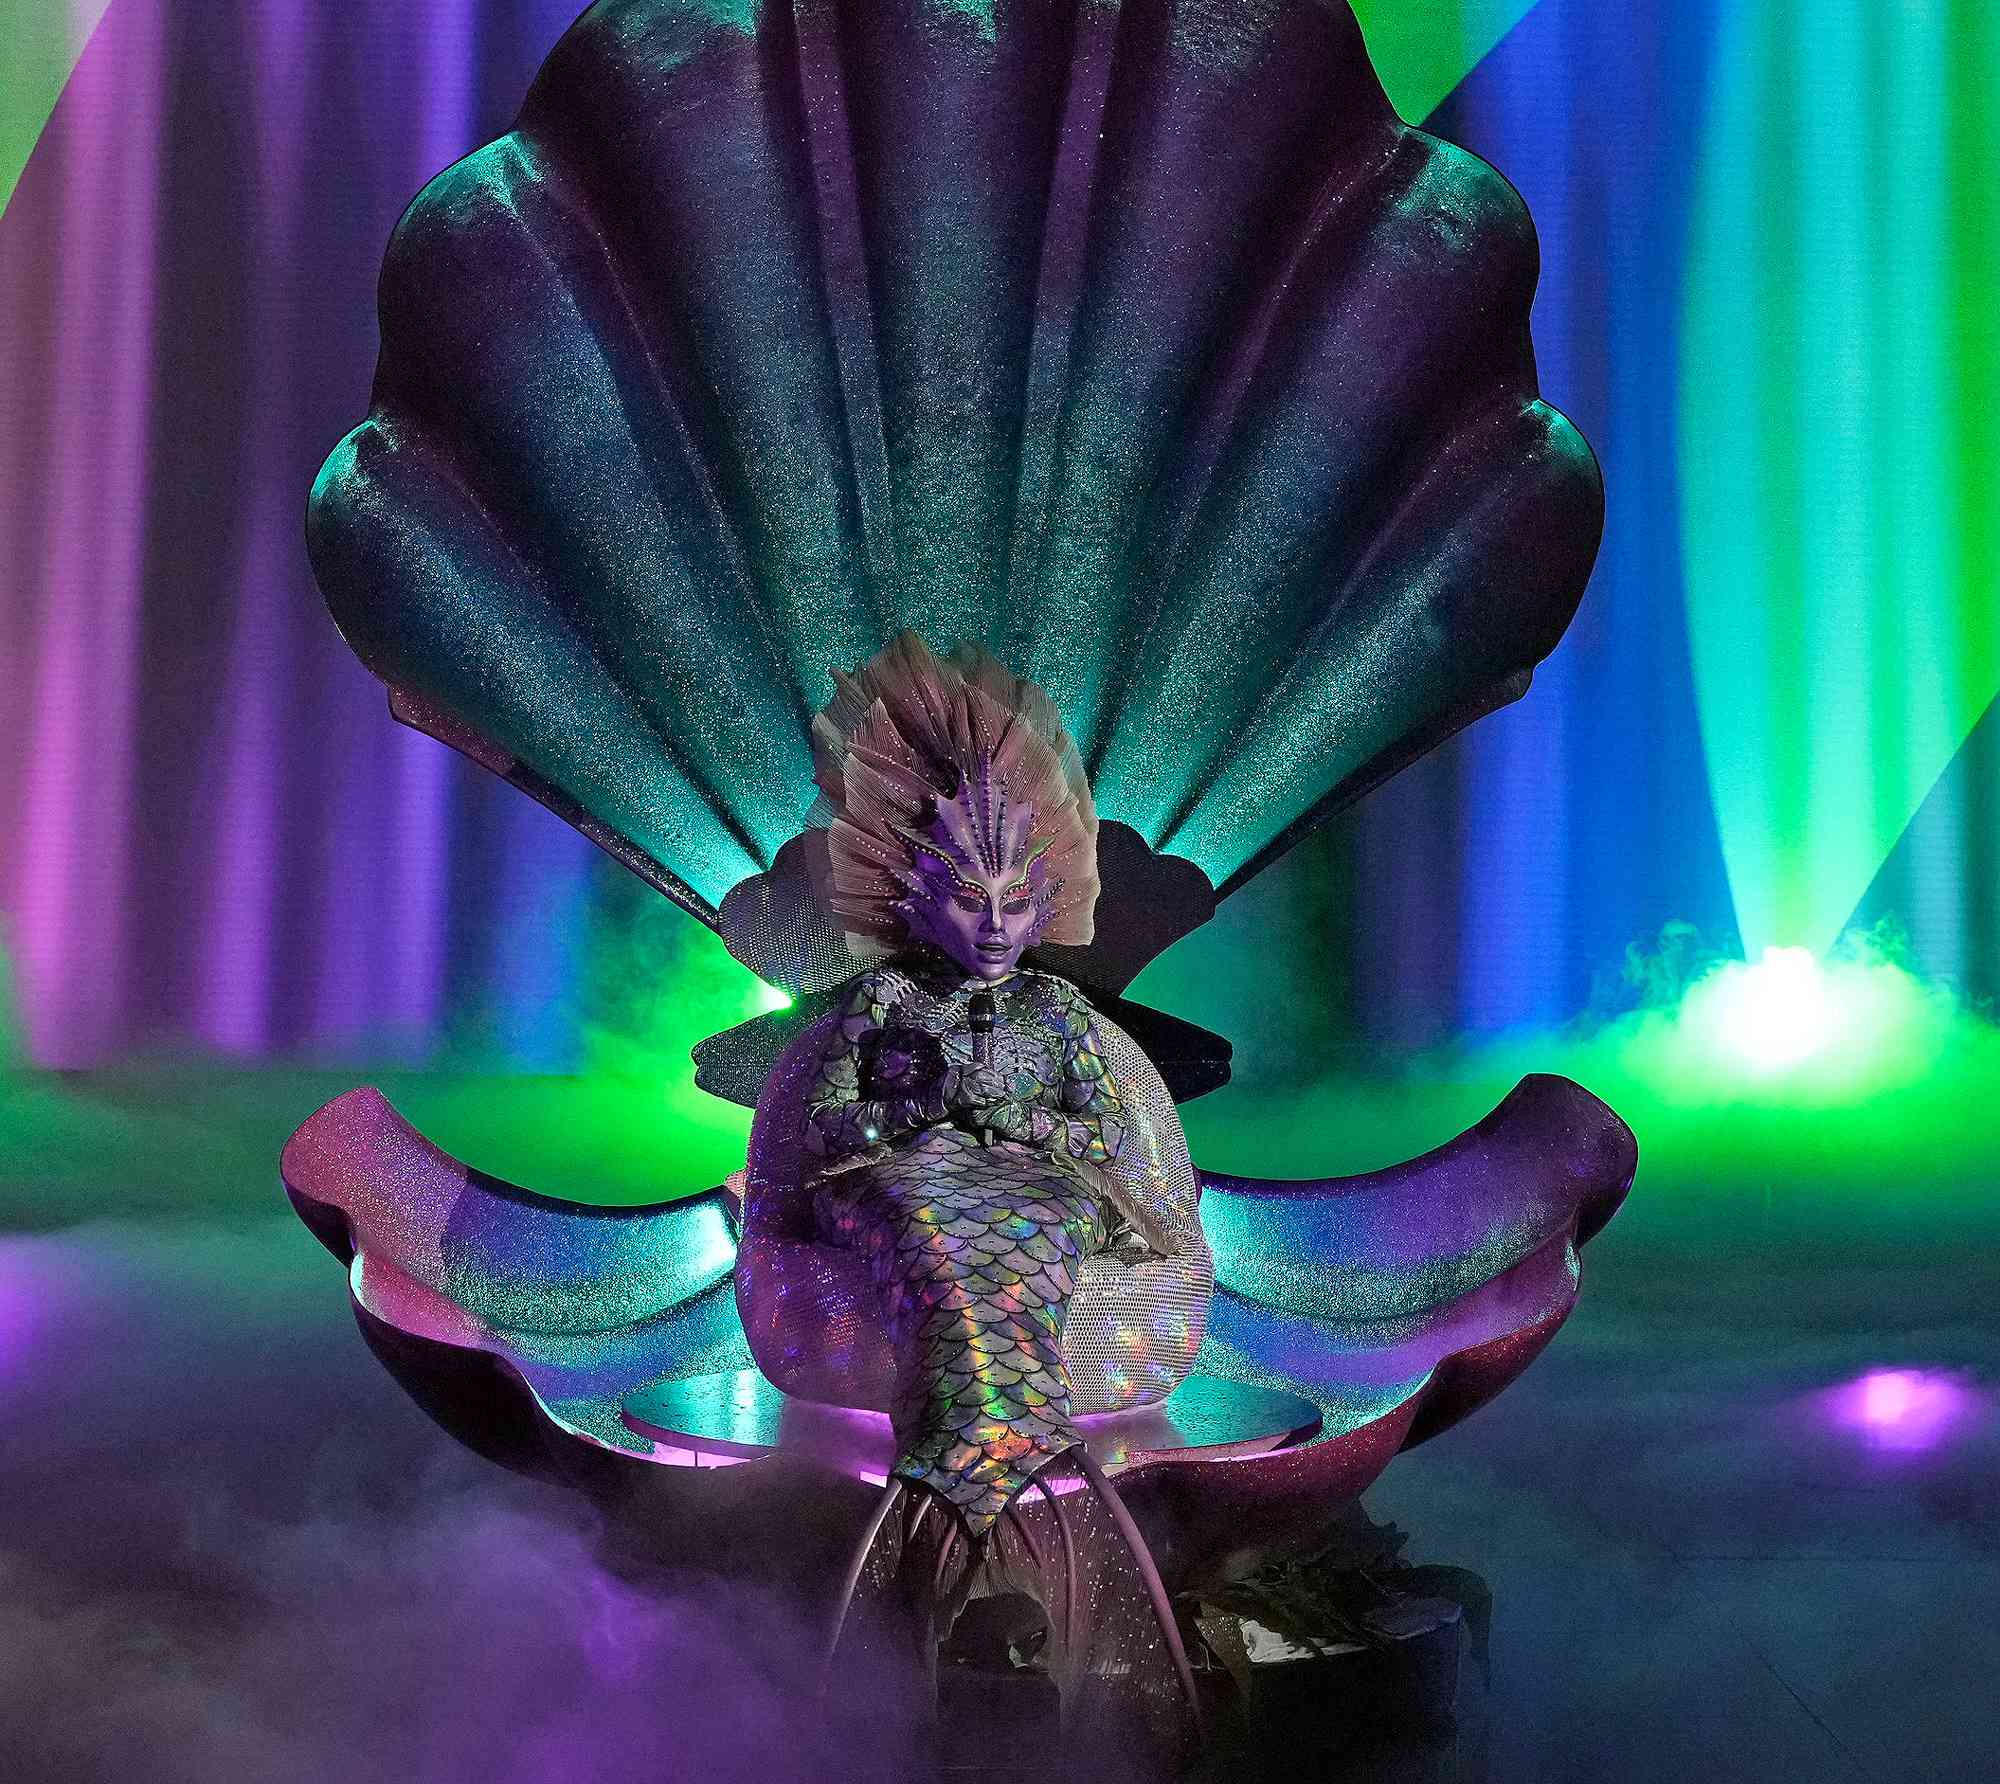 THE MASKED SINGER: Mermaid in the “Andrew Lloyd Webber Night” episode of THE MASKED SINGER airing Wednesday, Oct. 12